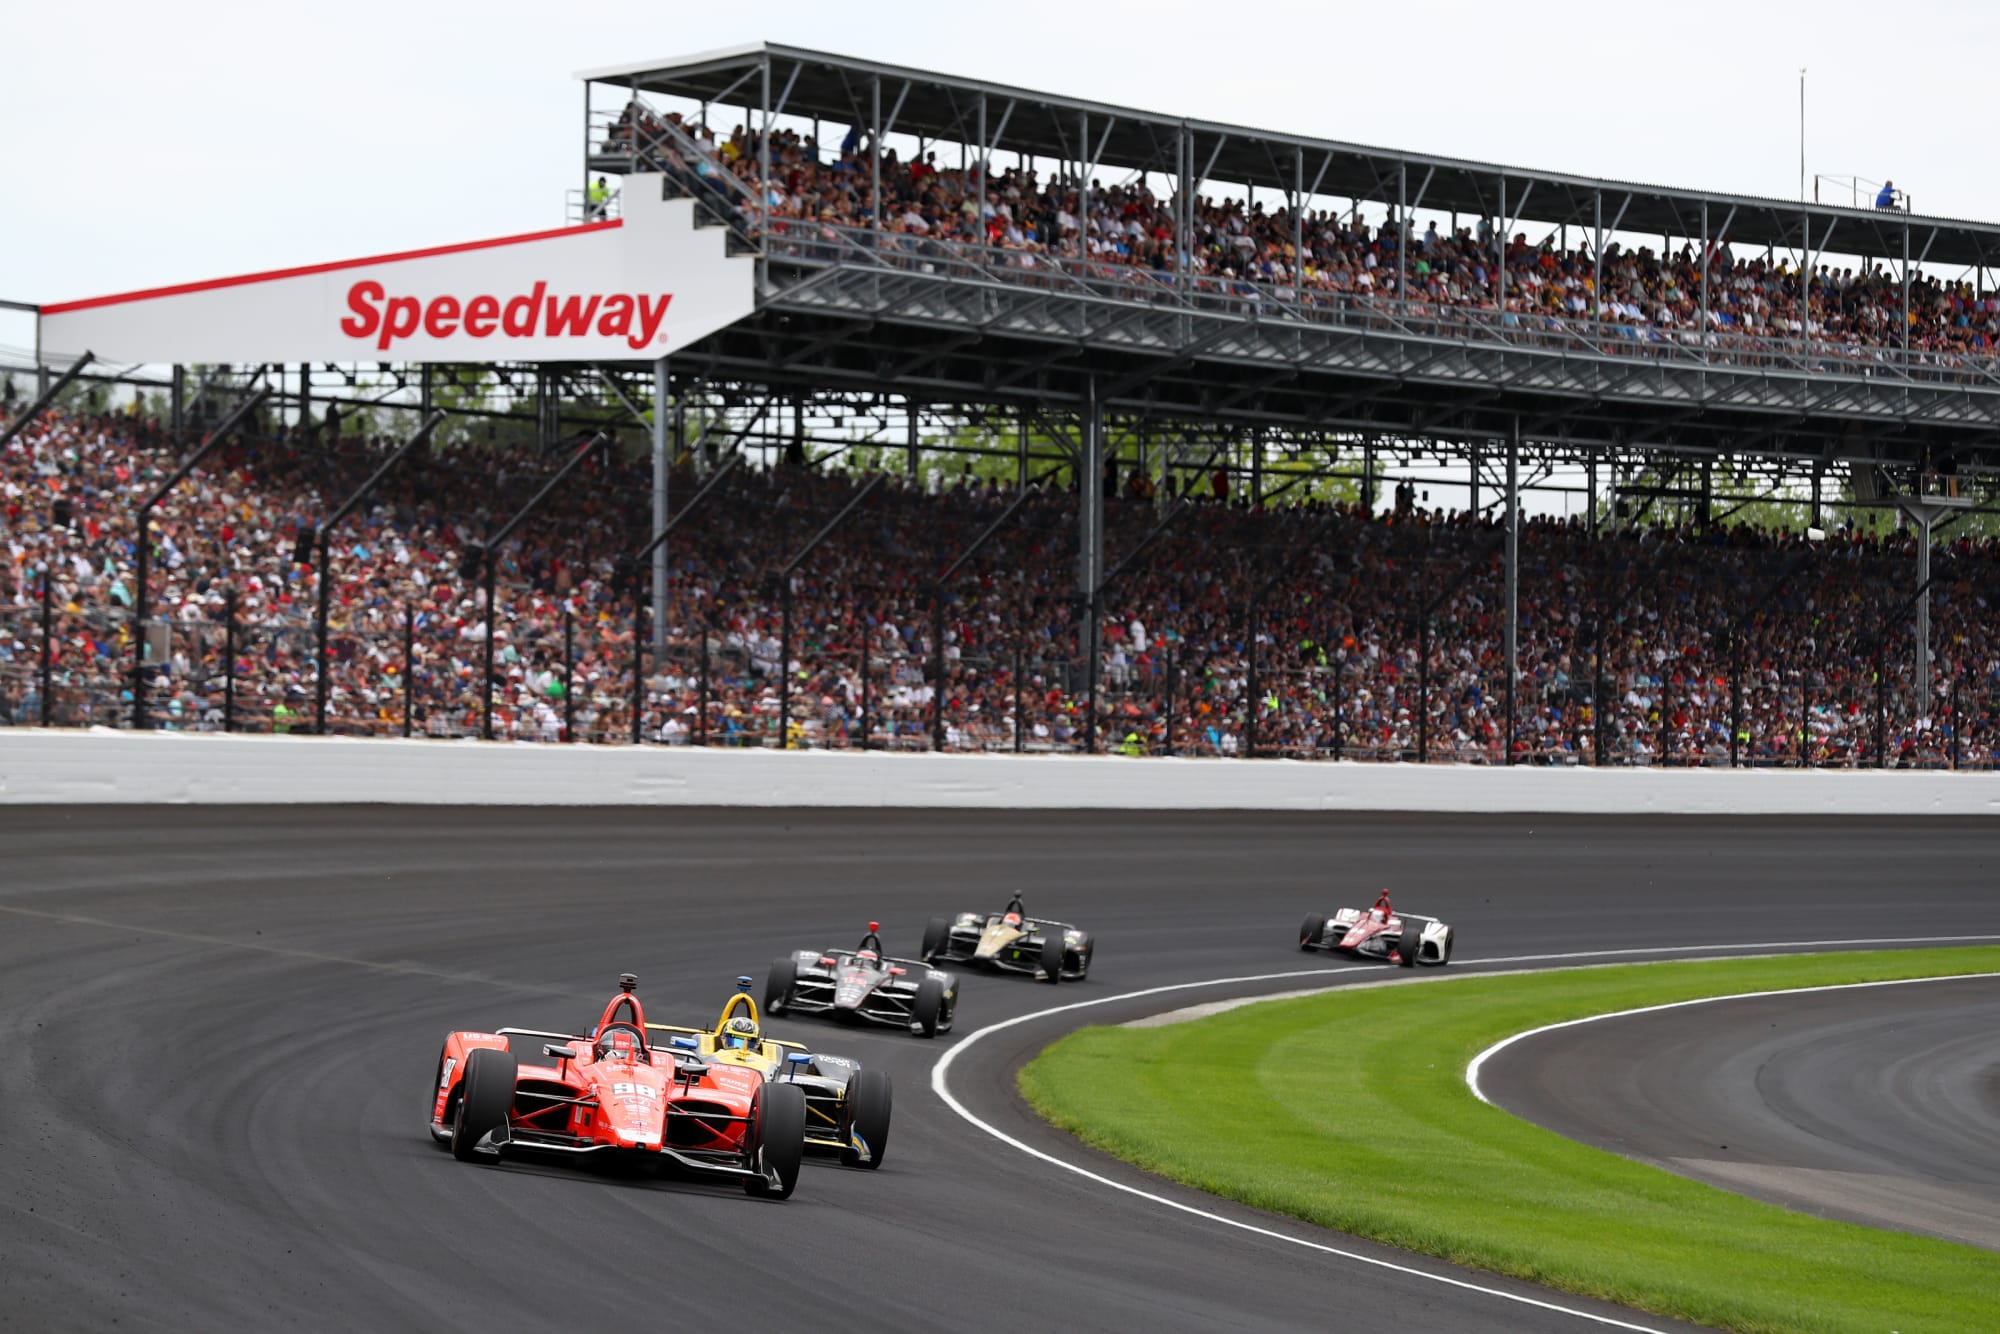 Indy 500 Updated attendance plan announced by IMS